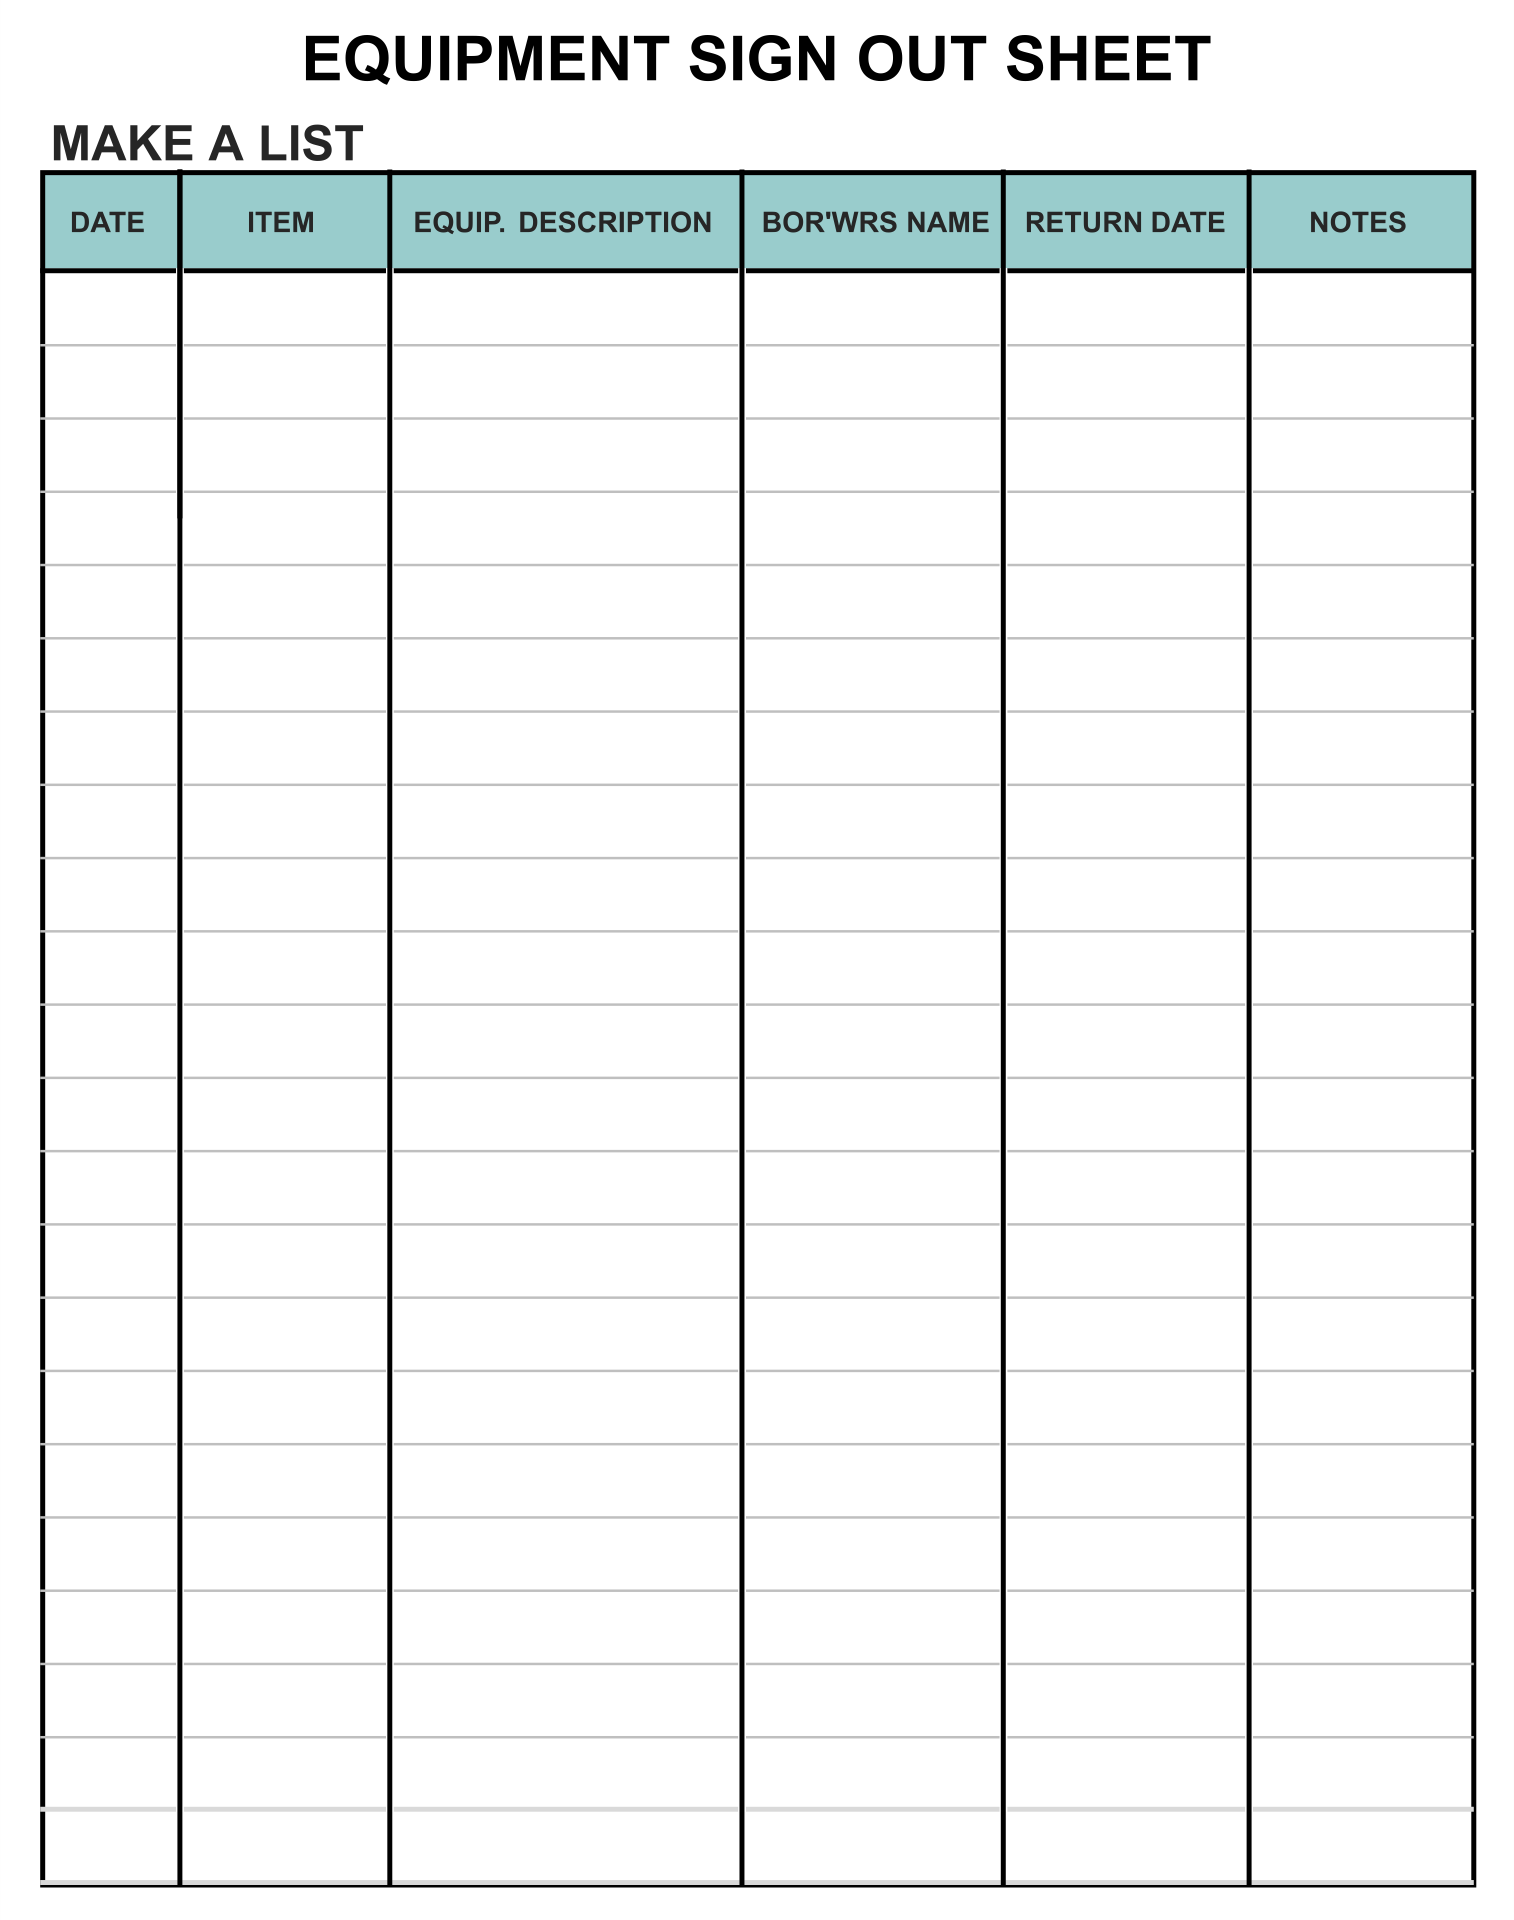 Sign Out Sheet Template For Equipment Printable